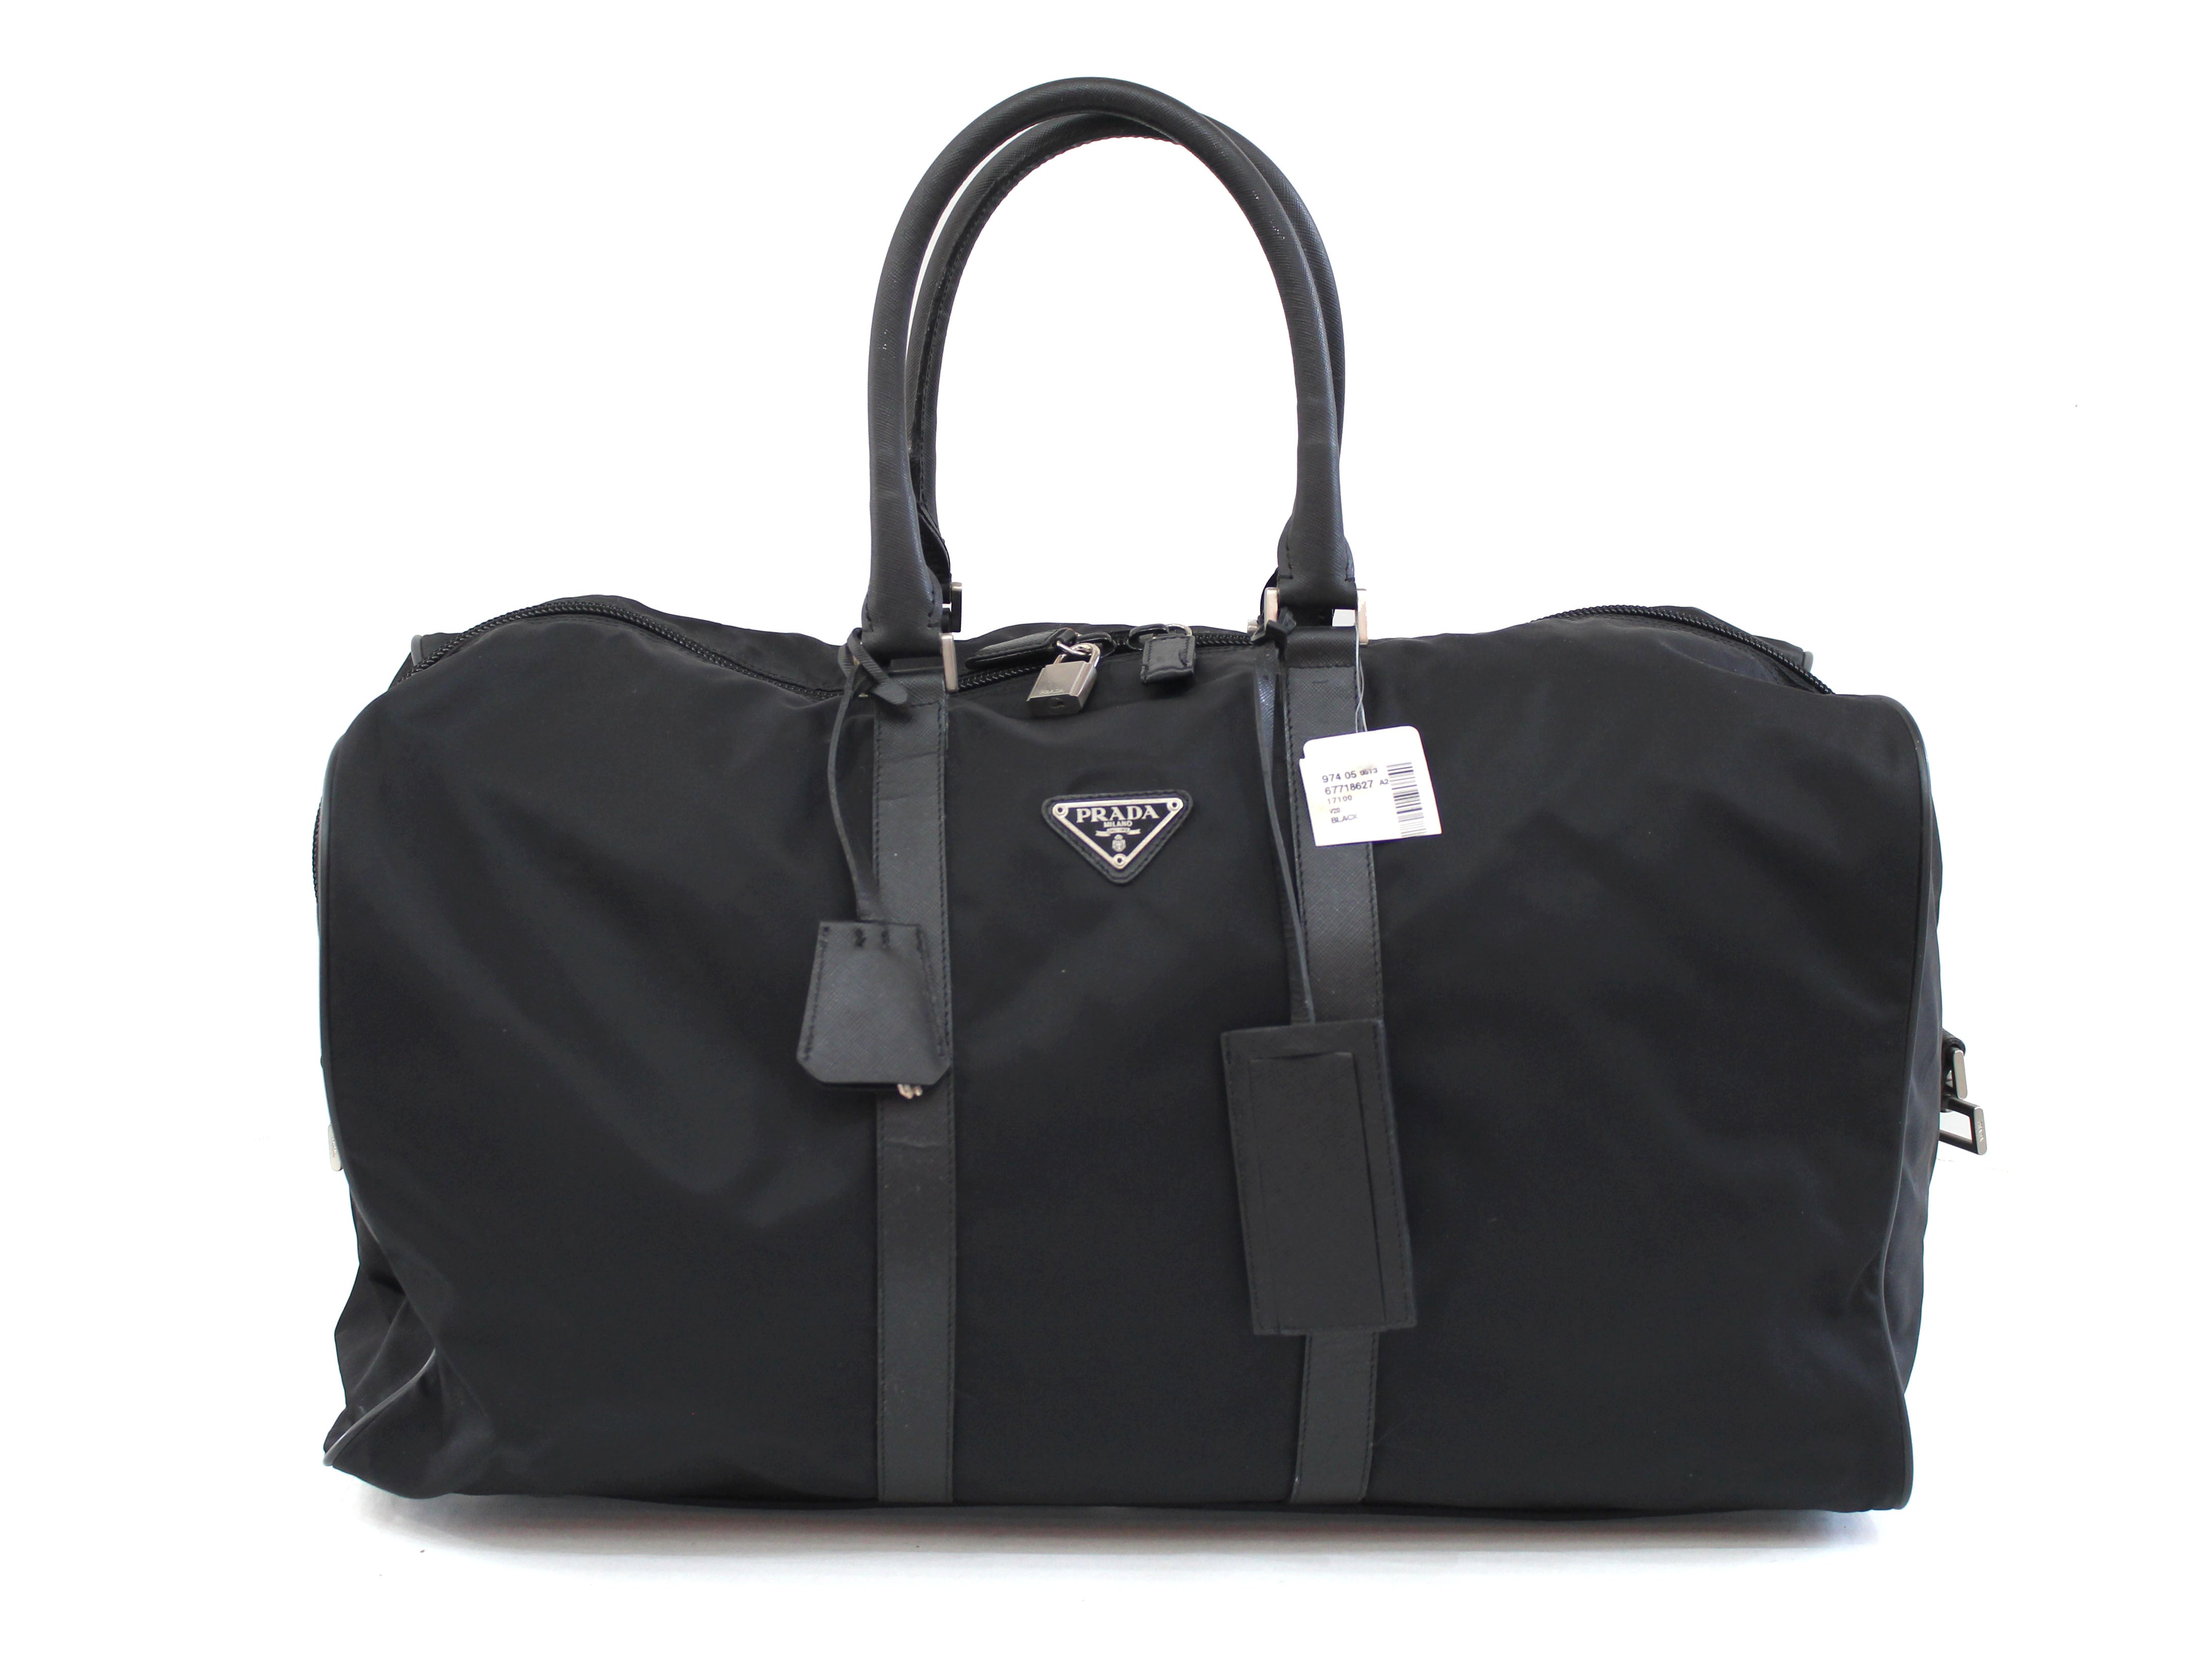 Authentic Prada Black Nylon and Saffiano Leather Duffle Travel Carry On Bag